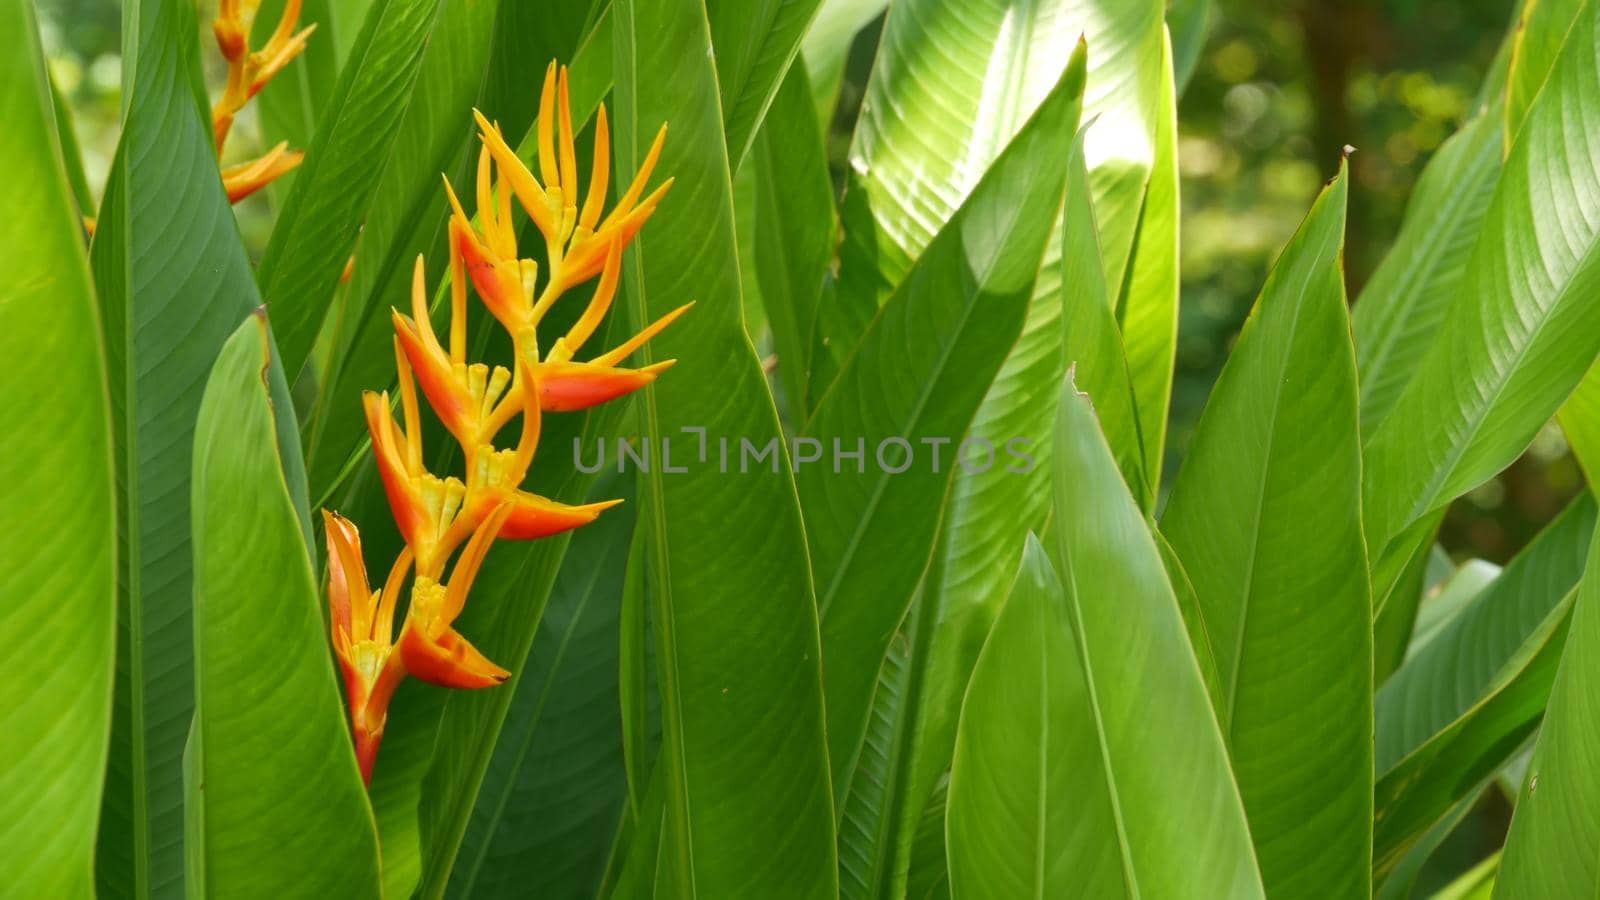 Blurred close up macro of colorful tropical flower in spring garden with tender petals among sunny lush foliage. Abstract natural exotic background with copy space. Floral blossom and leaves pattern.